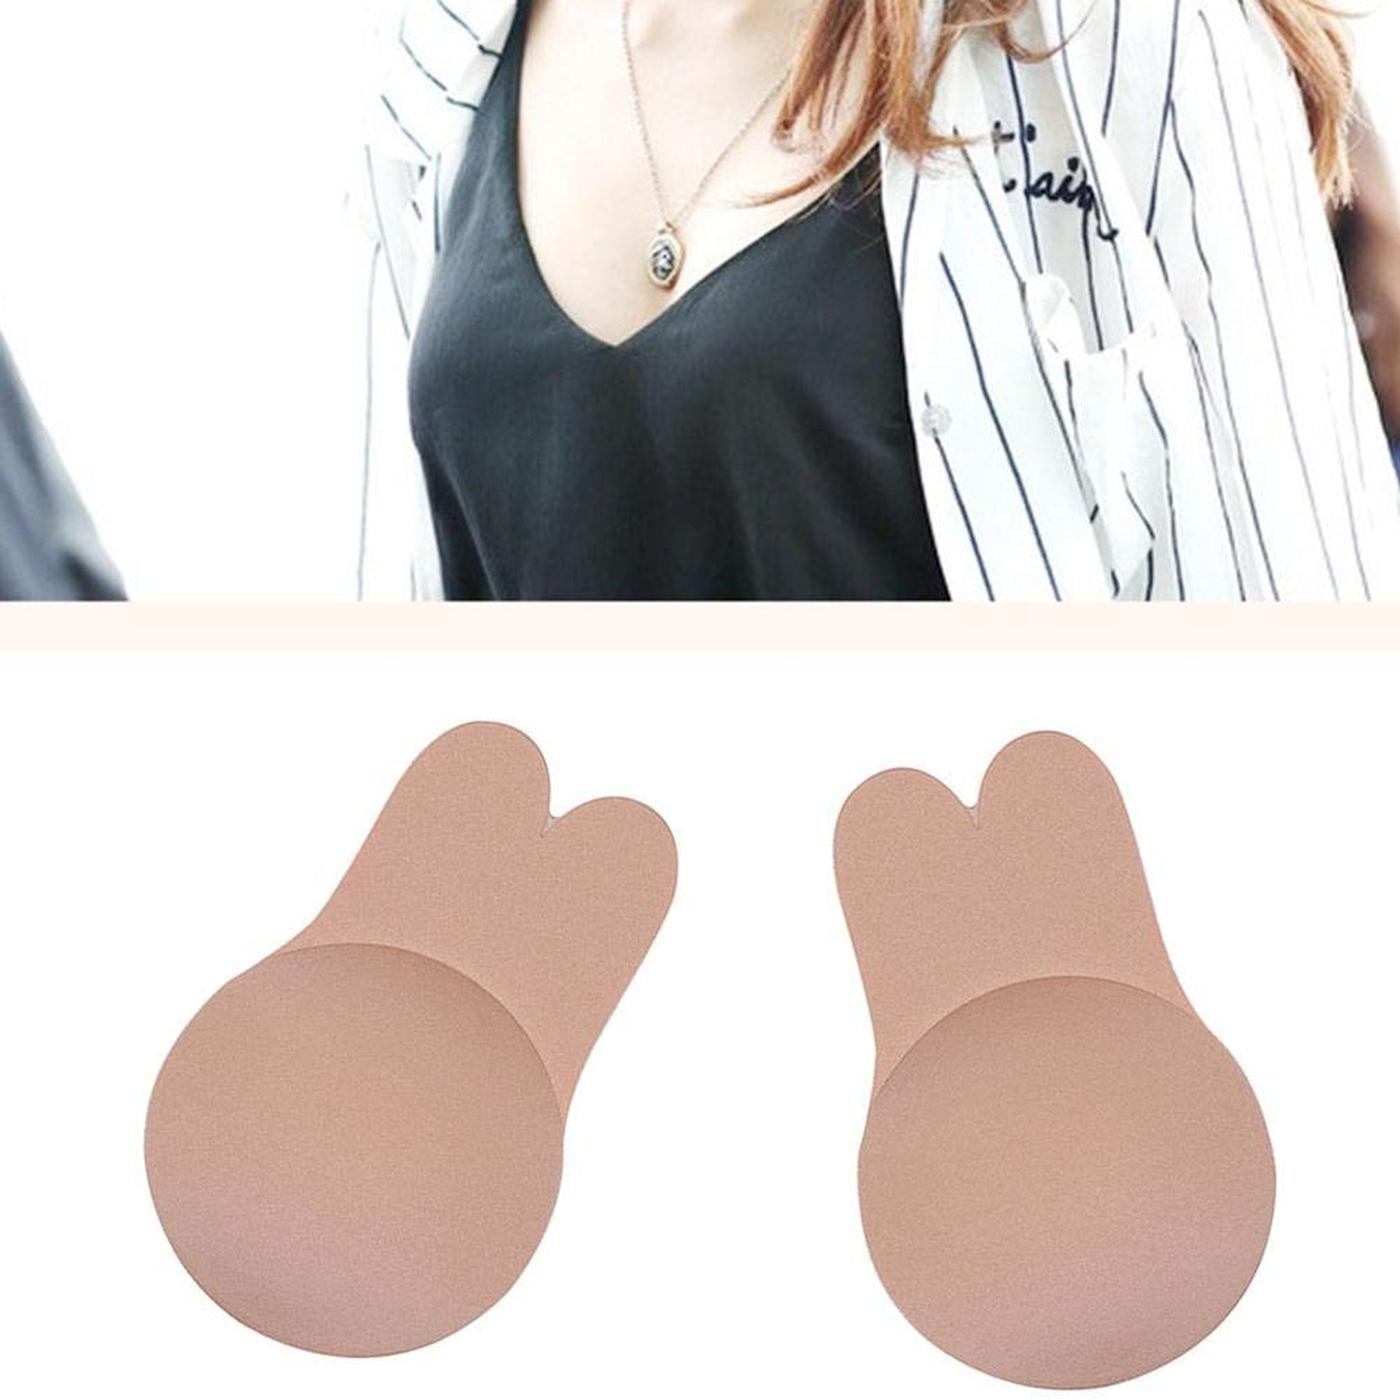 Silicon Push-up Nipple Cover For Top-Less & Backless Dresses